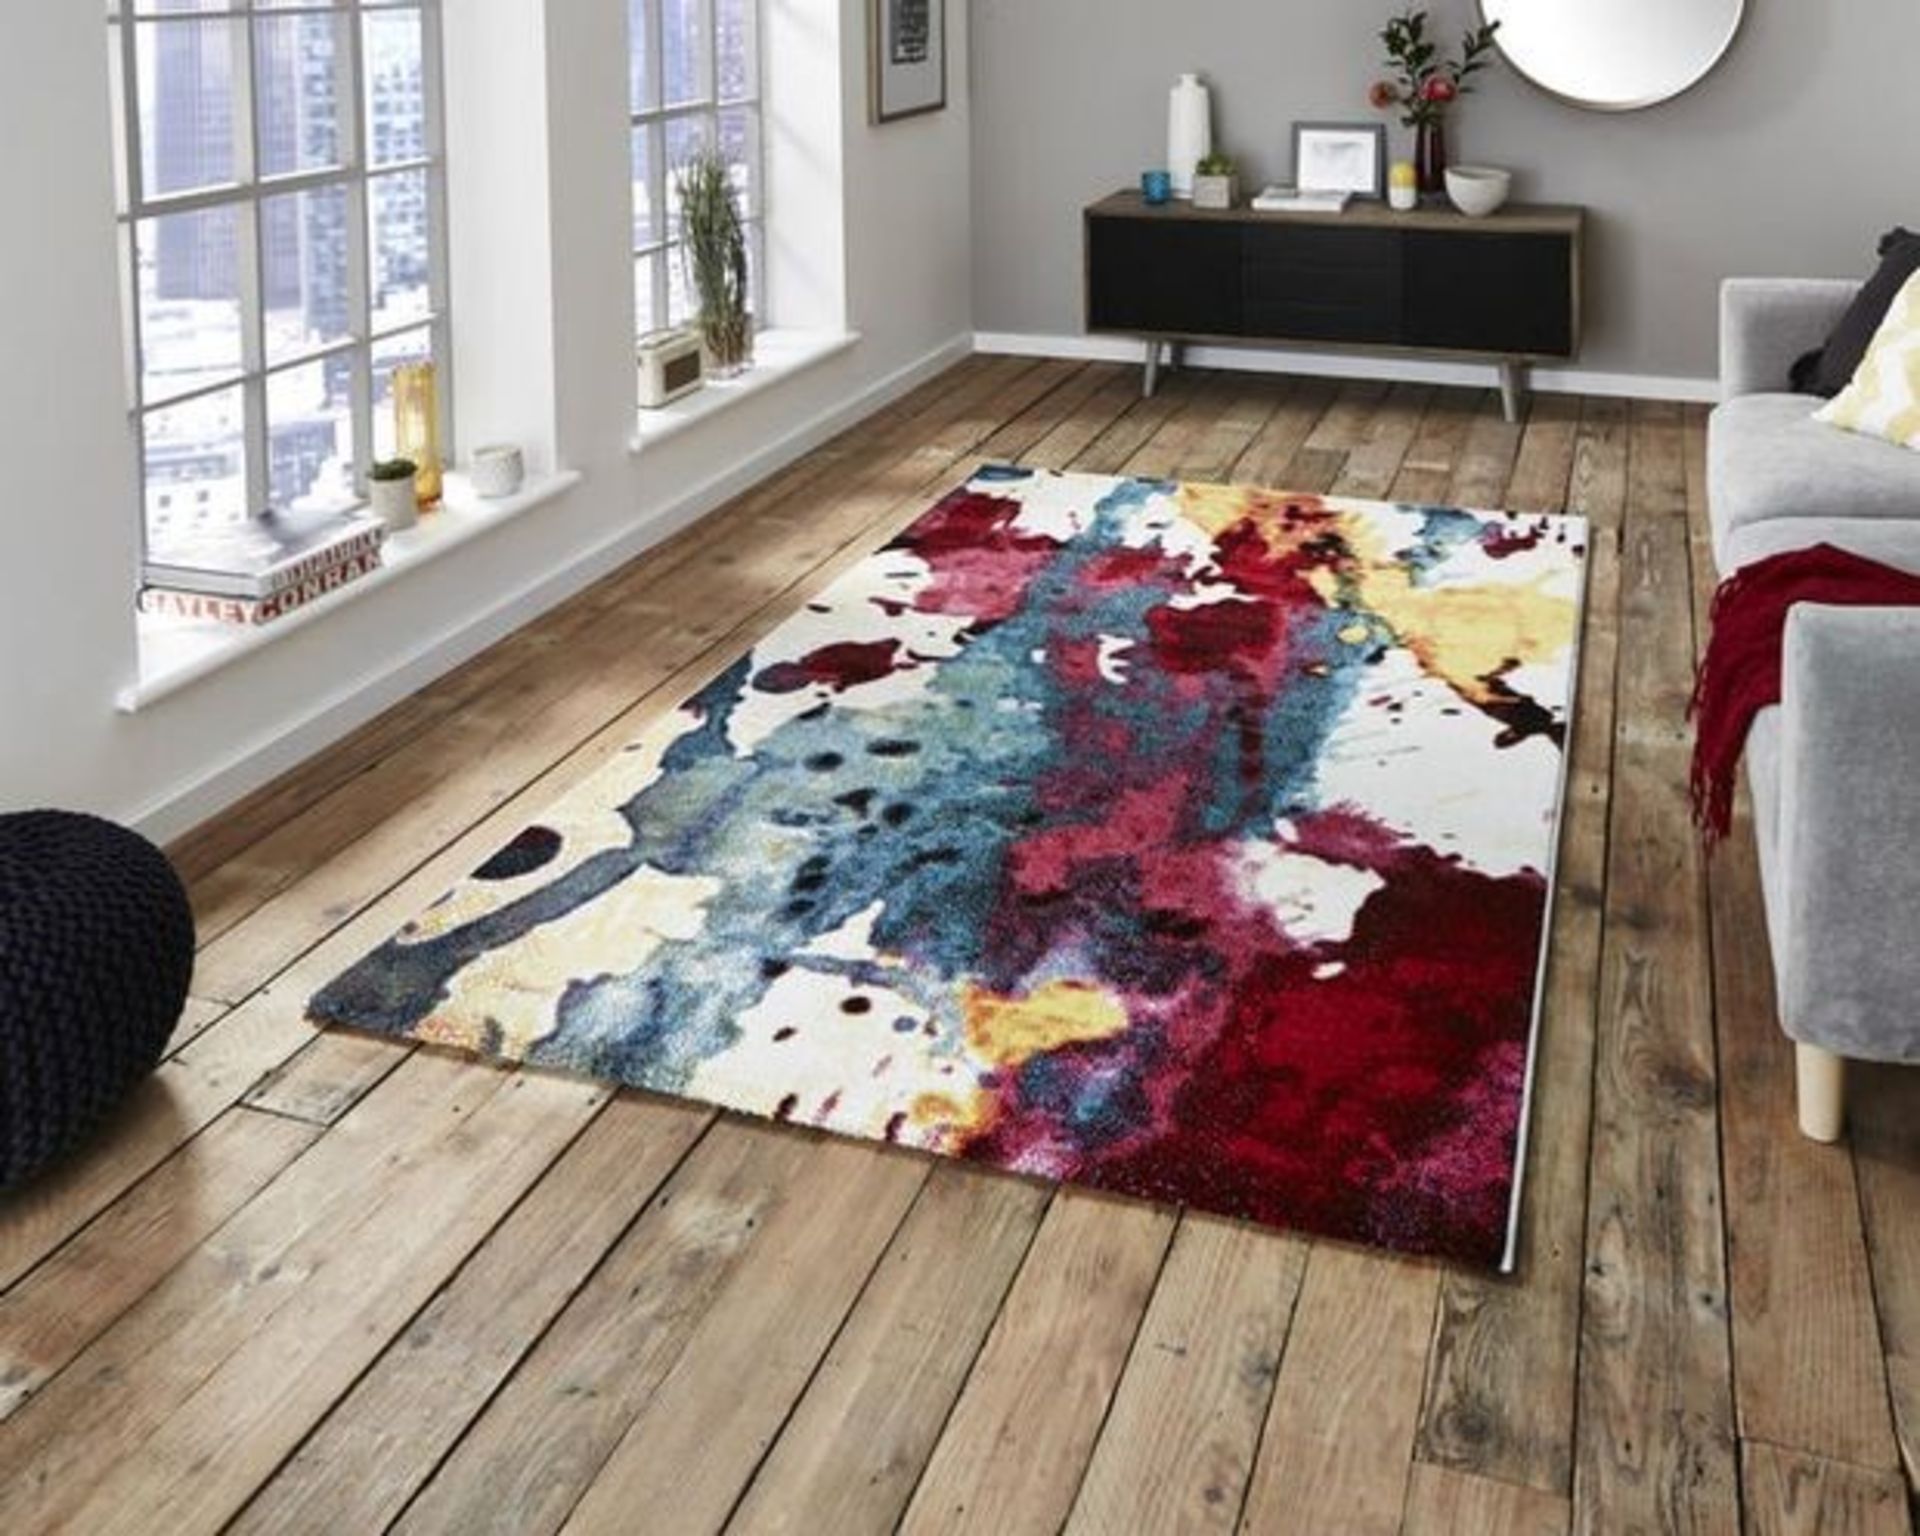 1 GRADE A BAGGED DESIGNER SUNRISE RUG / 160 X 220CM / RRP £159.00 (PUBLIC VIEWING AVAILABLE) - Image 2 of 2